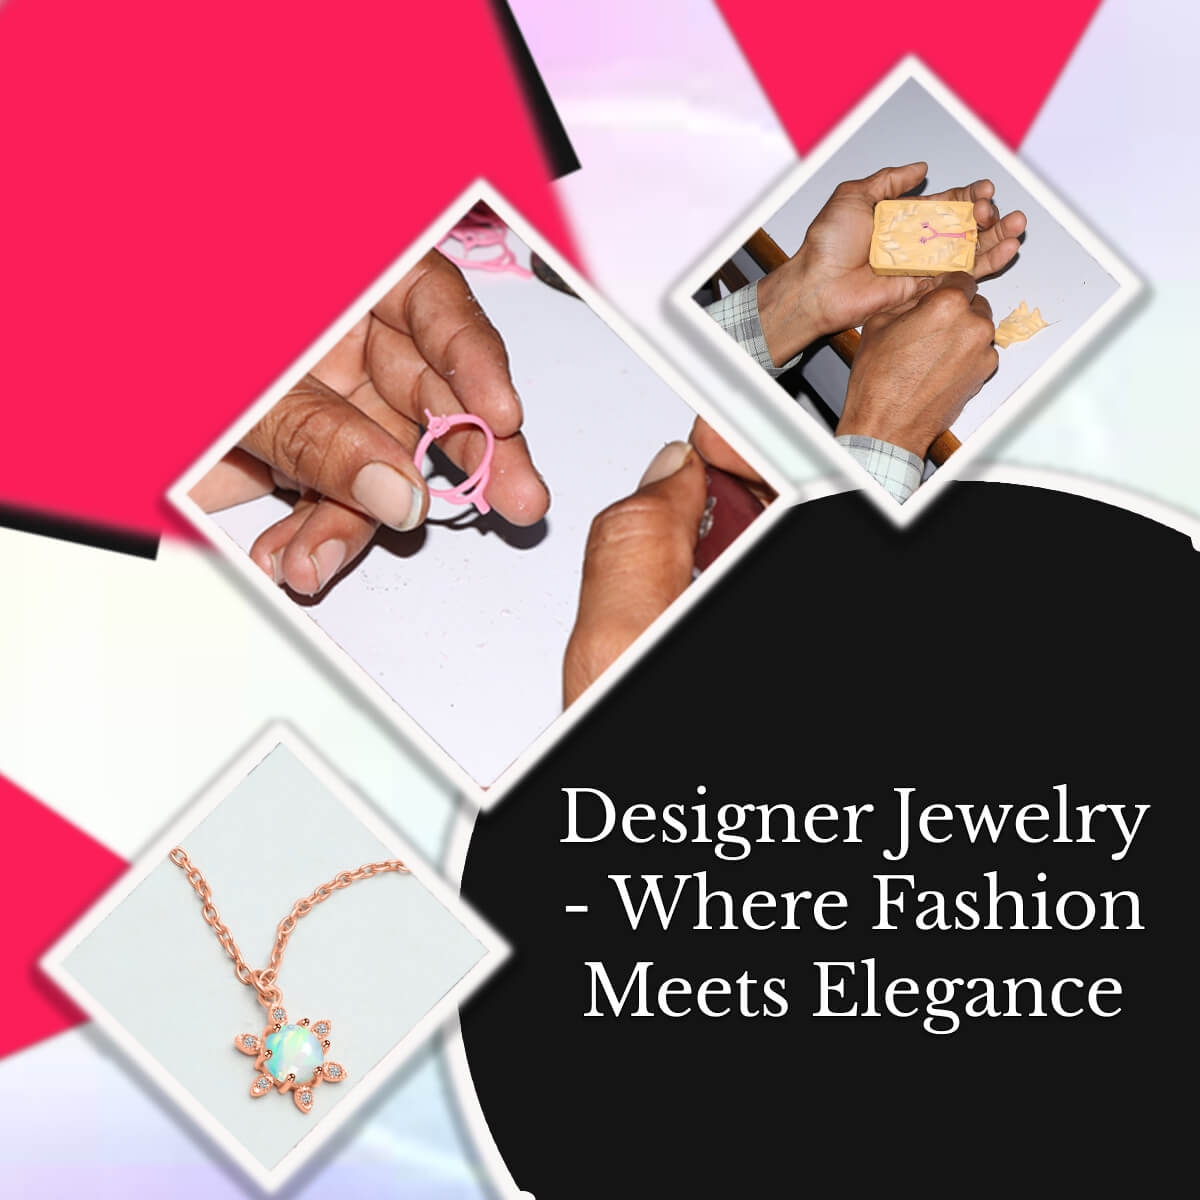 Shopping & Styling for Designer Jewelry